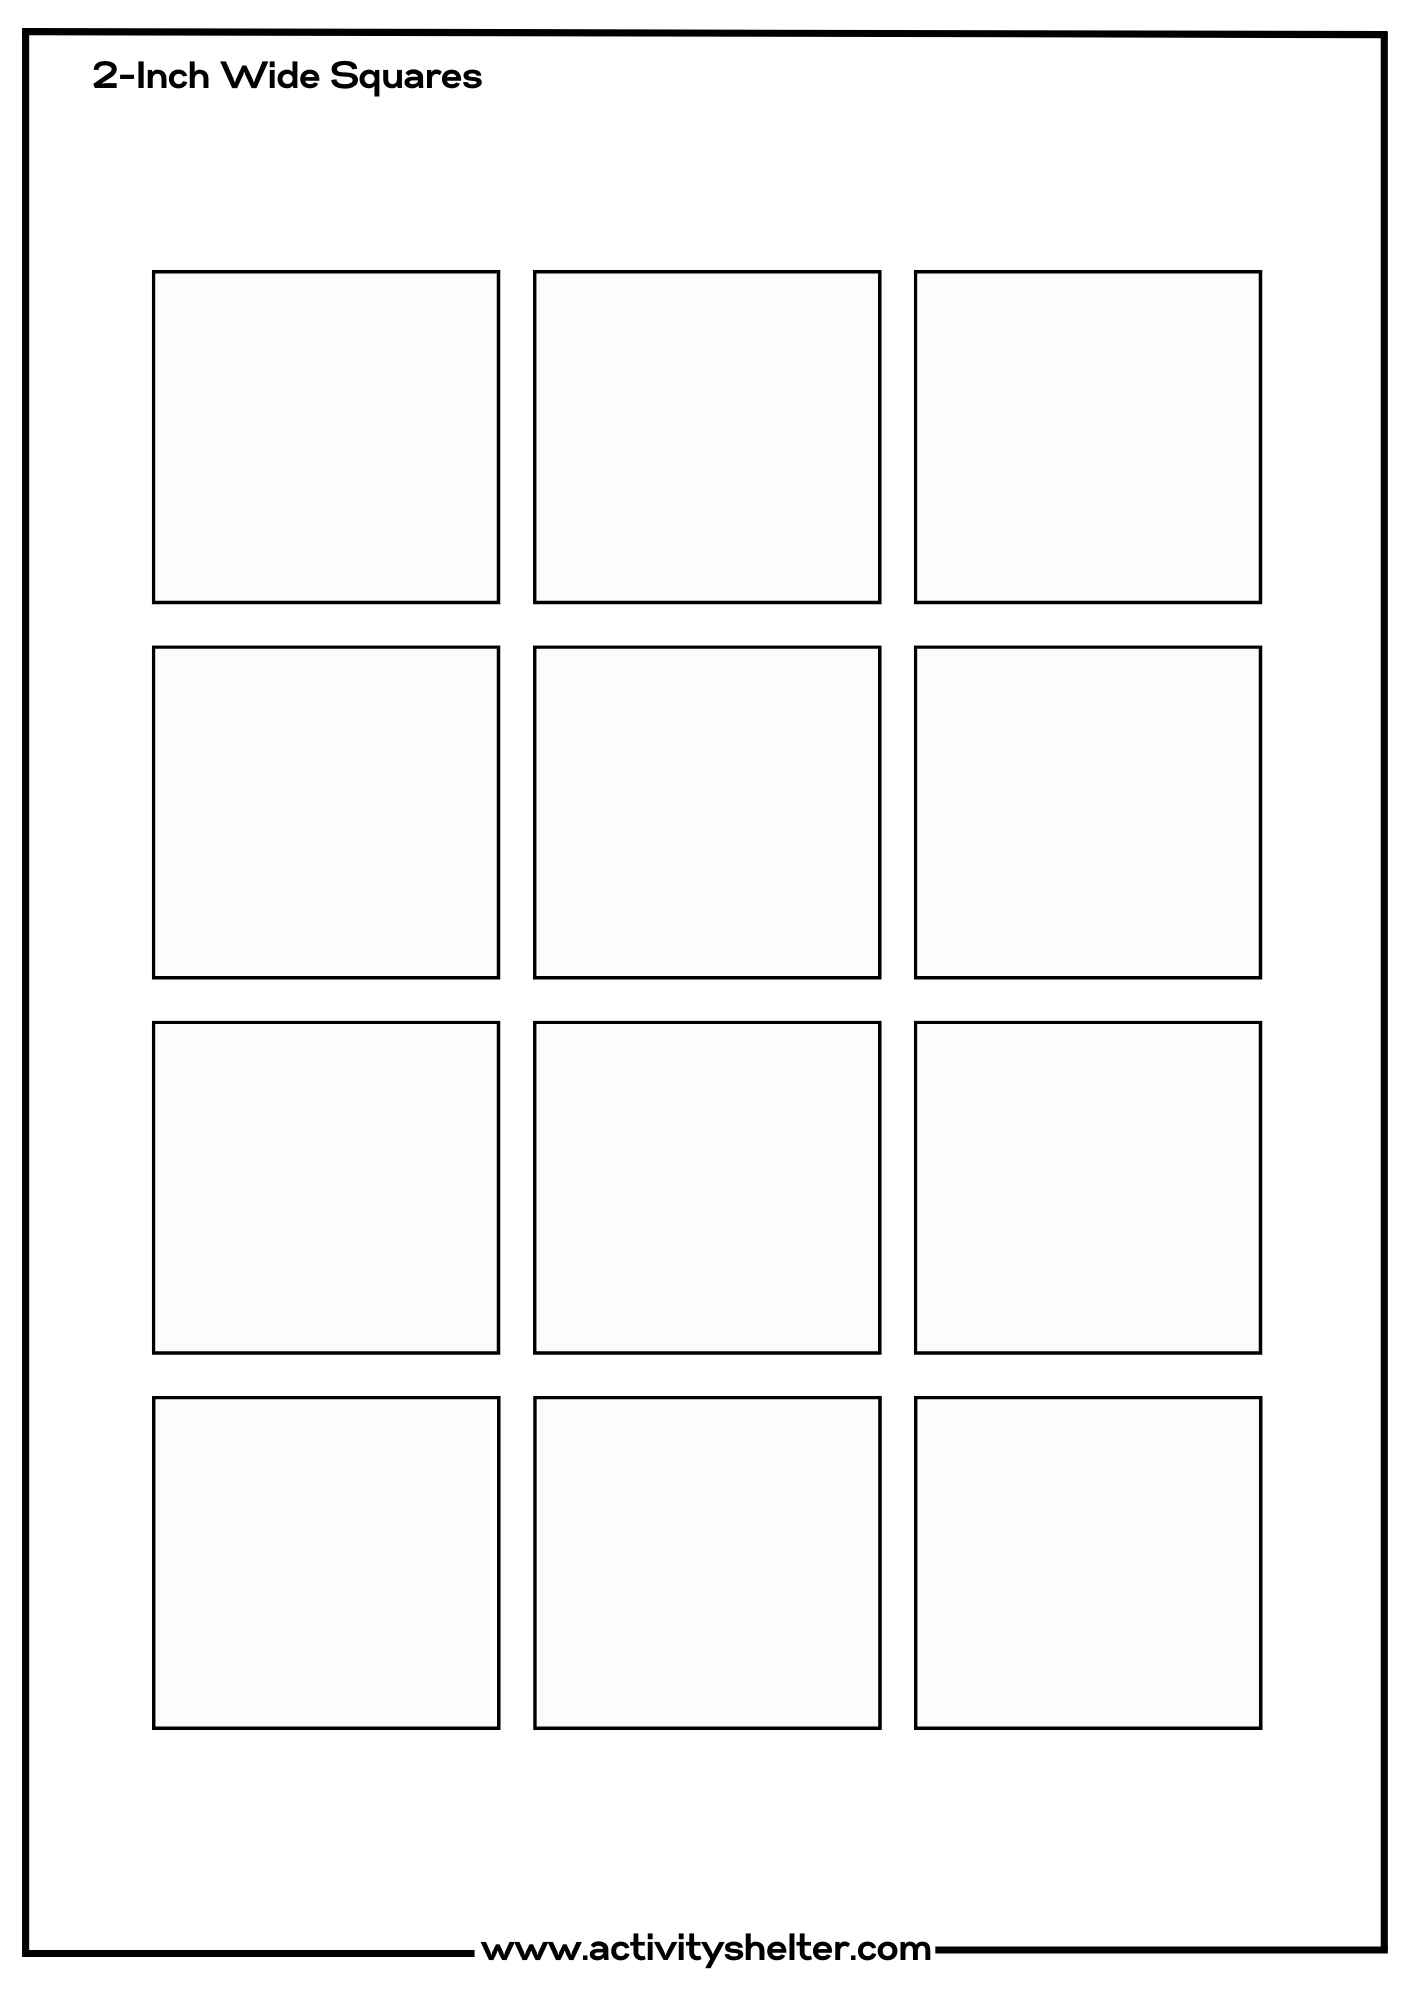 Square Templates 2-Inch Wide Template